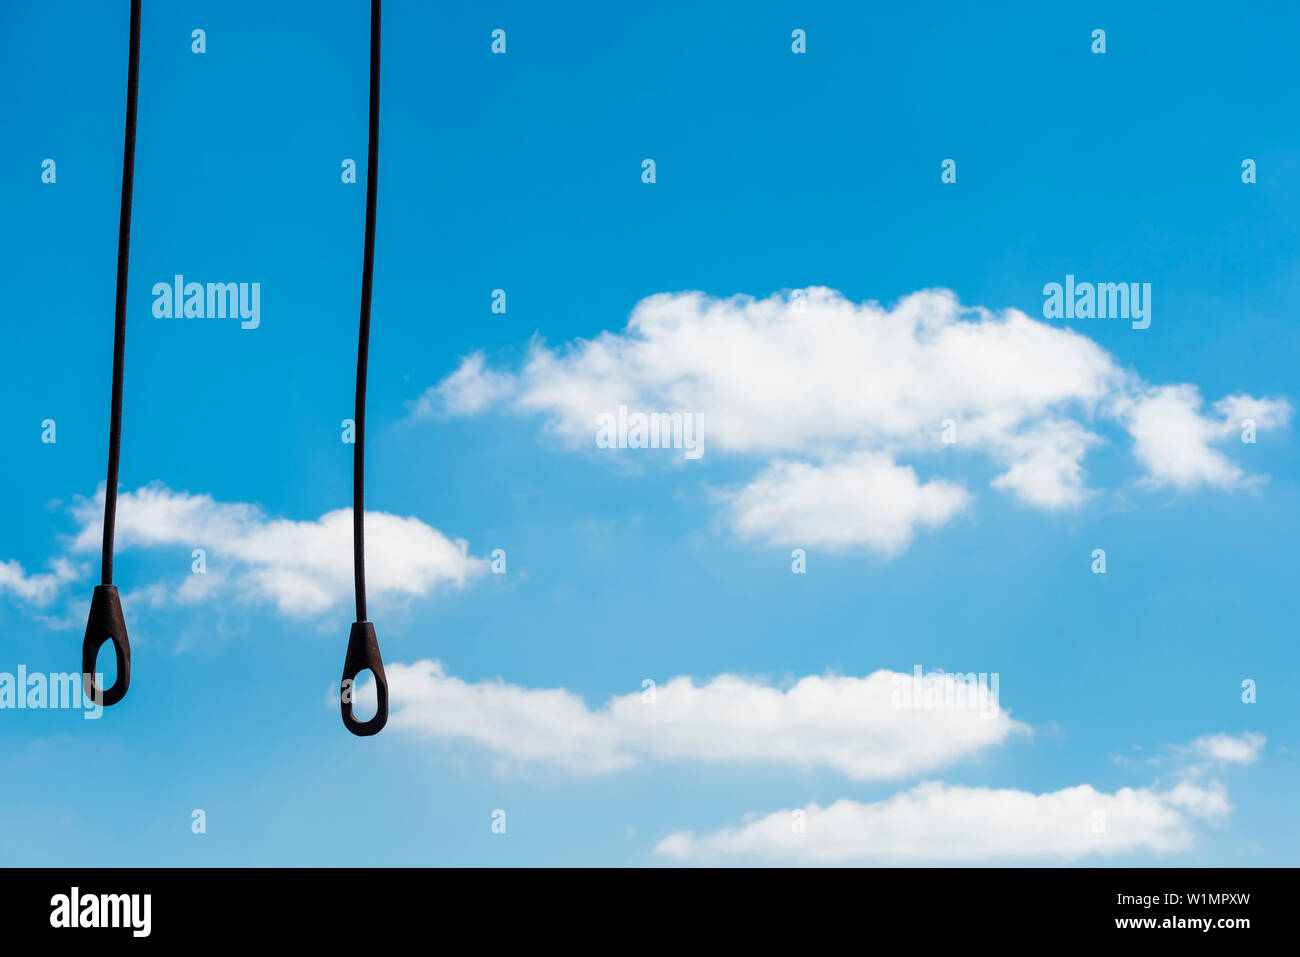 Steel ropes with hooks hang from a crane in front of blue sky with cumulus clouds, Hamburg, Germany Stock Photo